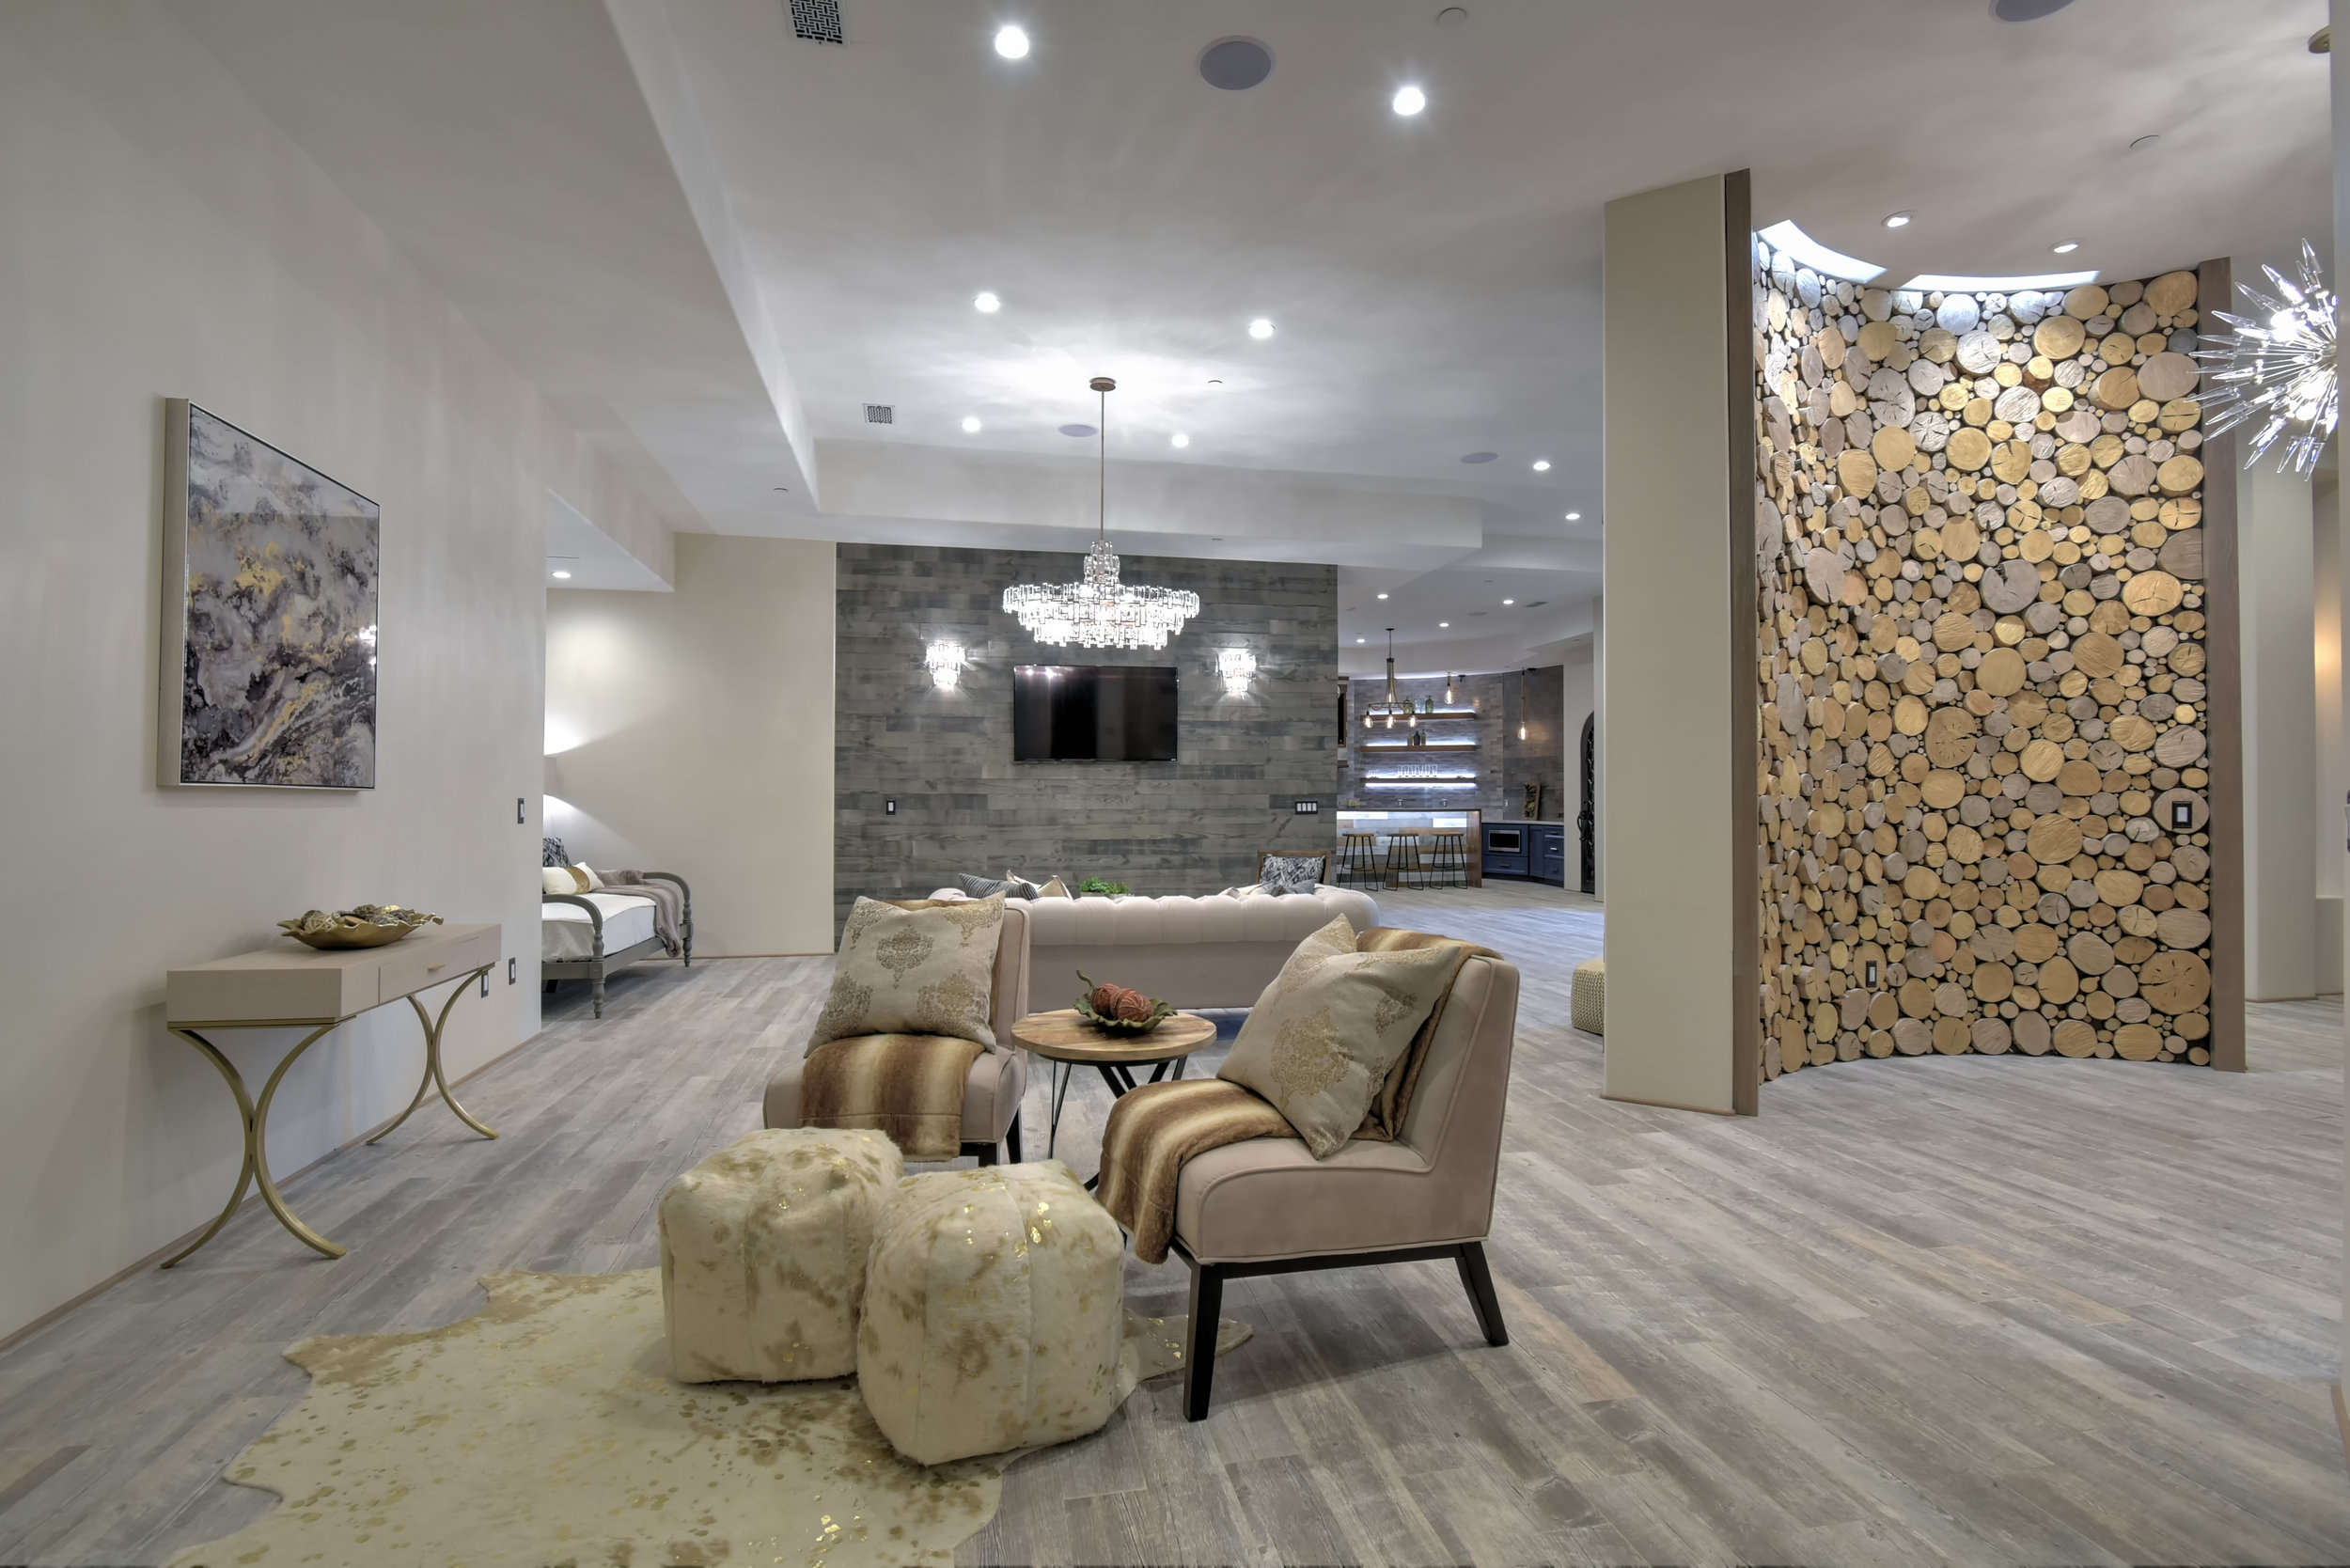  At the foot of the custom made iron staircase leading down to the lower level, Eucalyptus trees cleared from the Estate have found a new home as a breathtaking art installation on 2 beautifully curved walls. The gold and silver highlights of these w